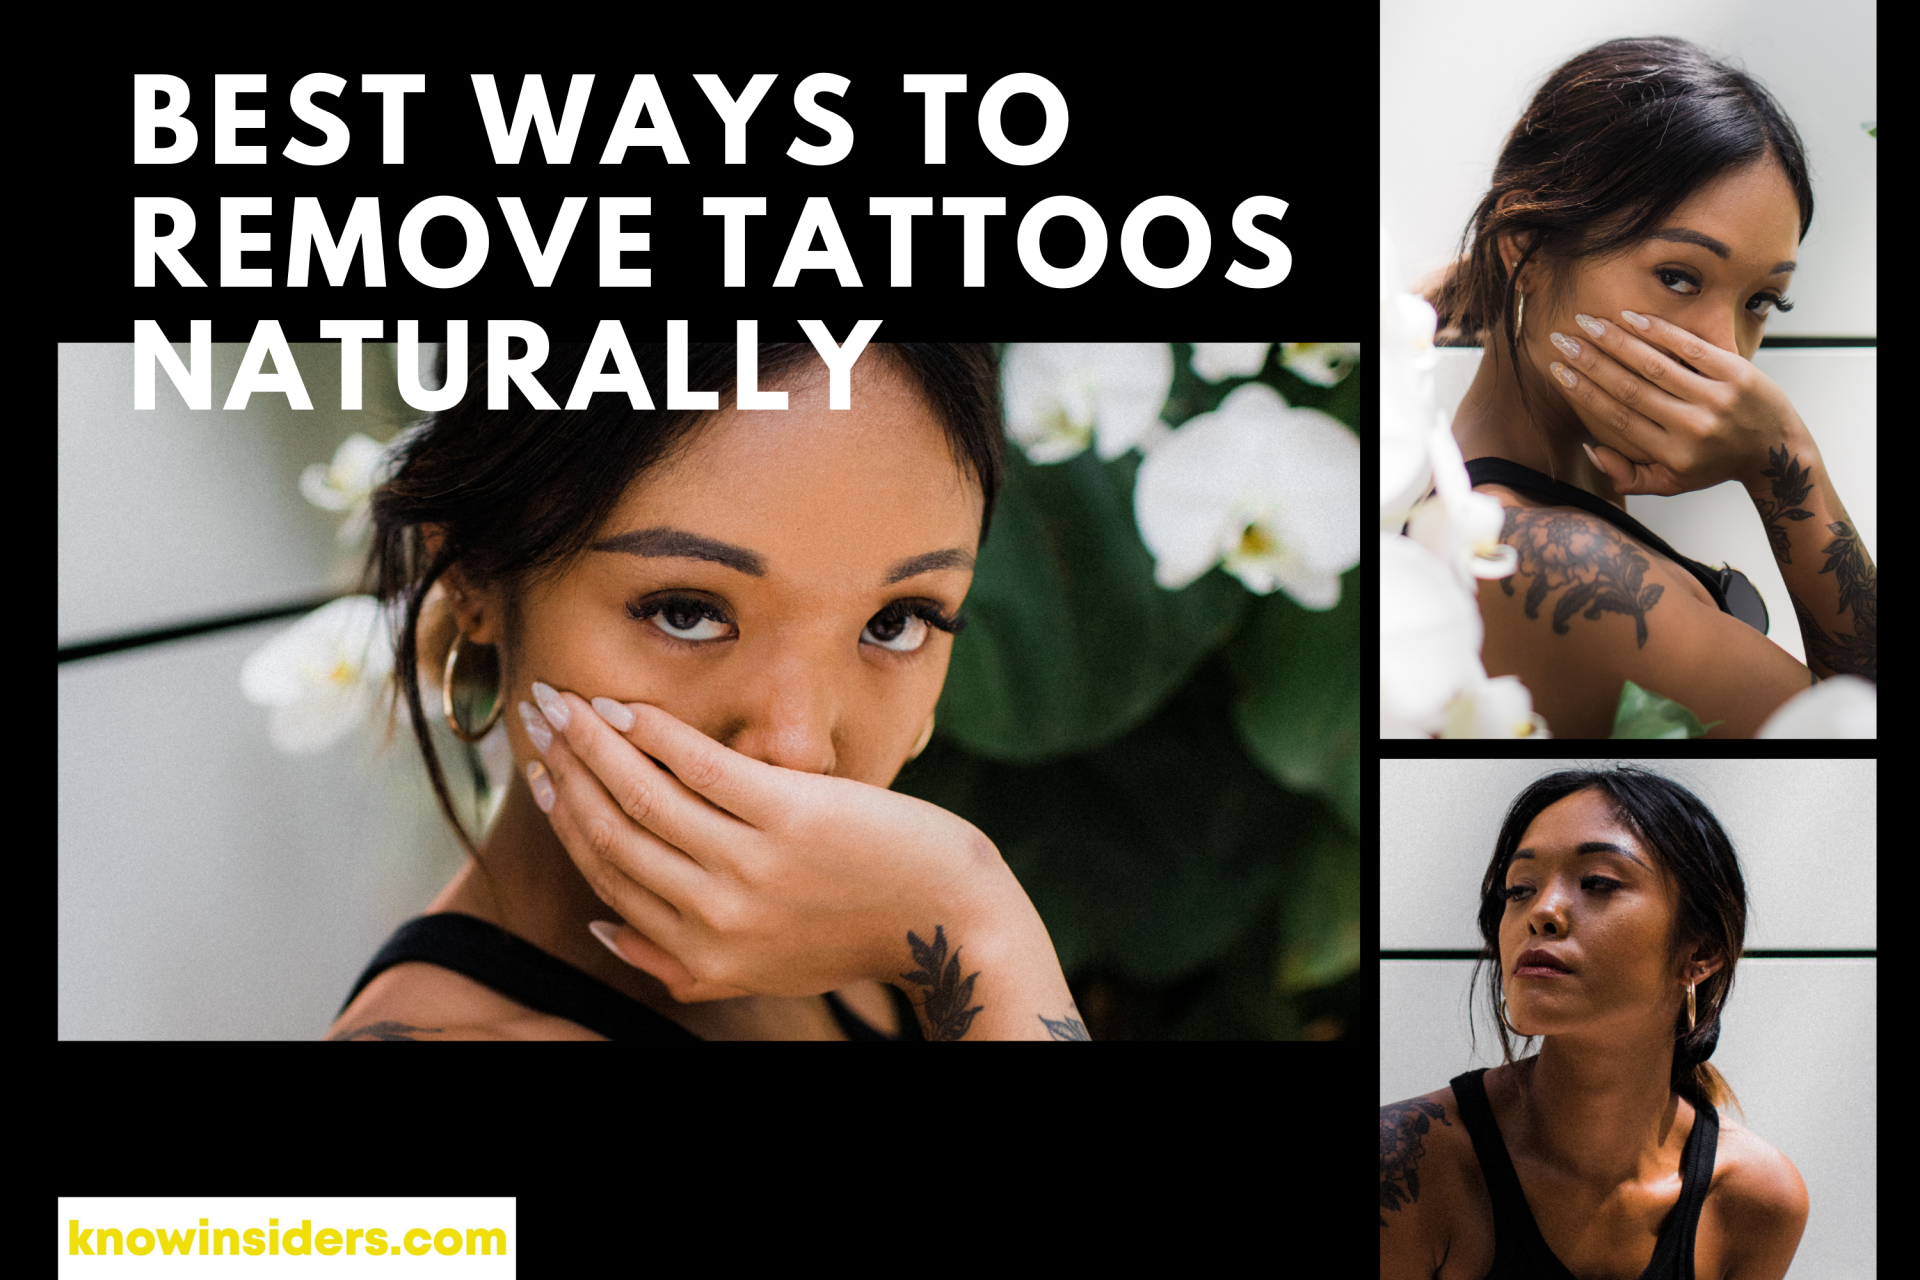 6 Best Ways To Remove Your Tattoos Naturally